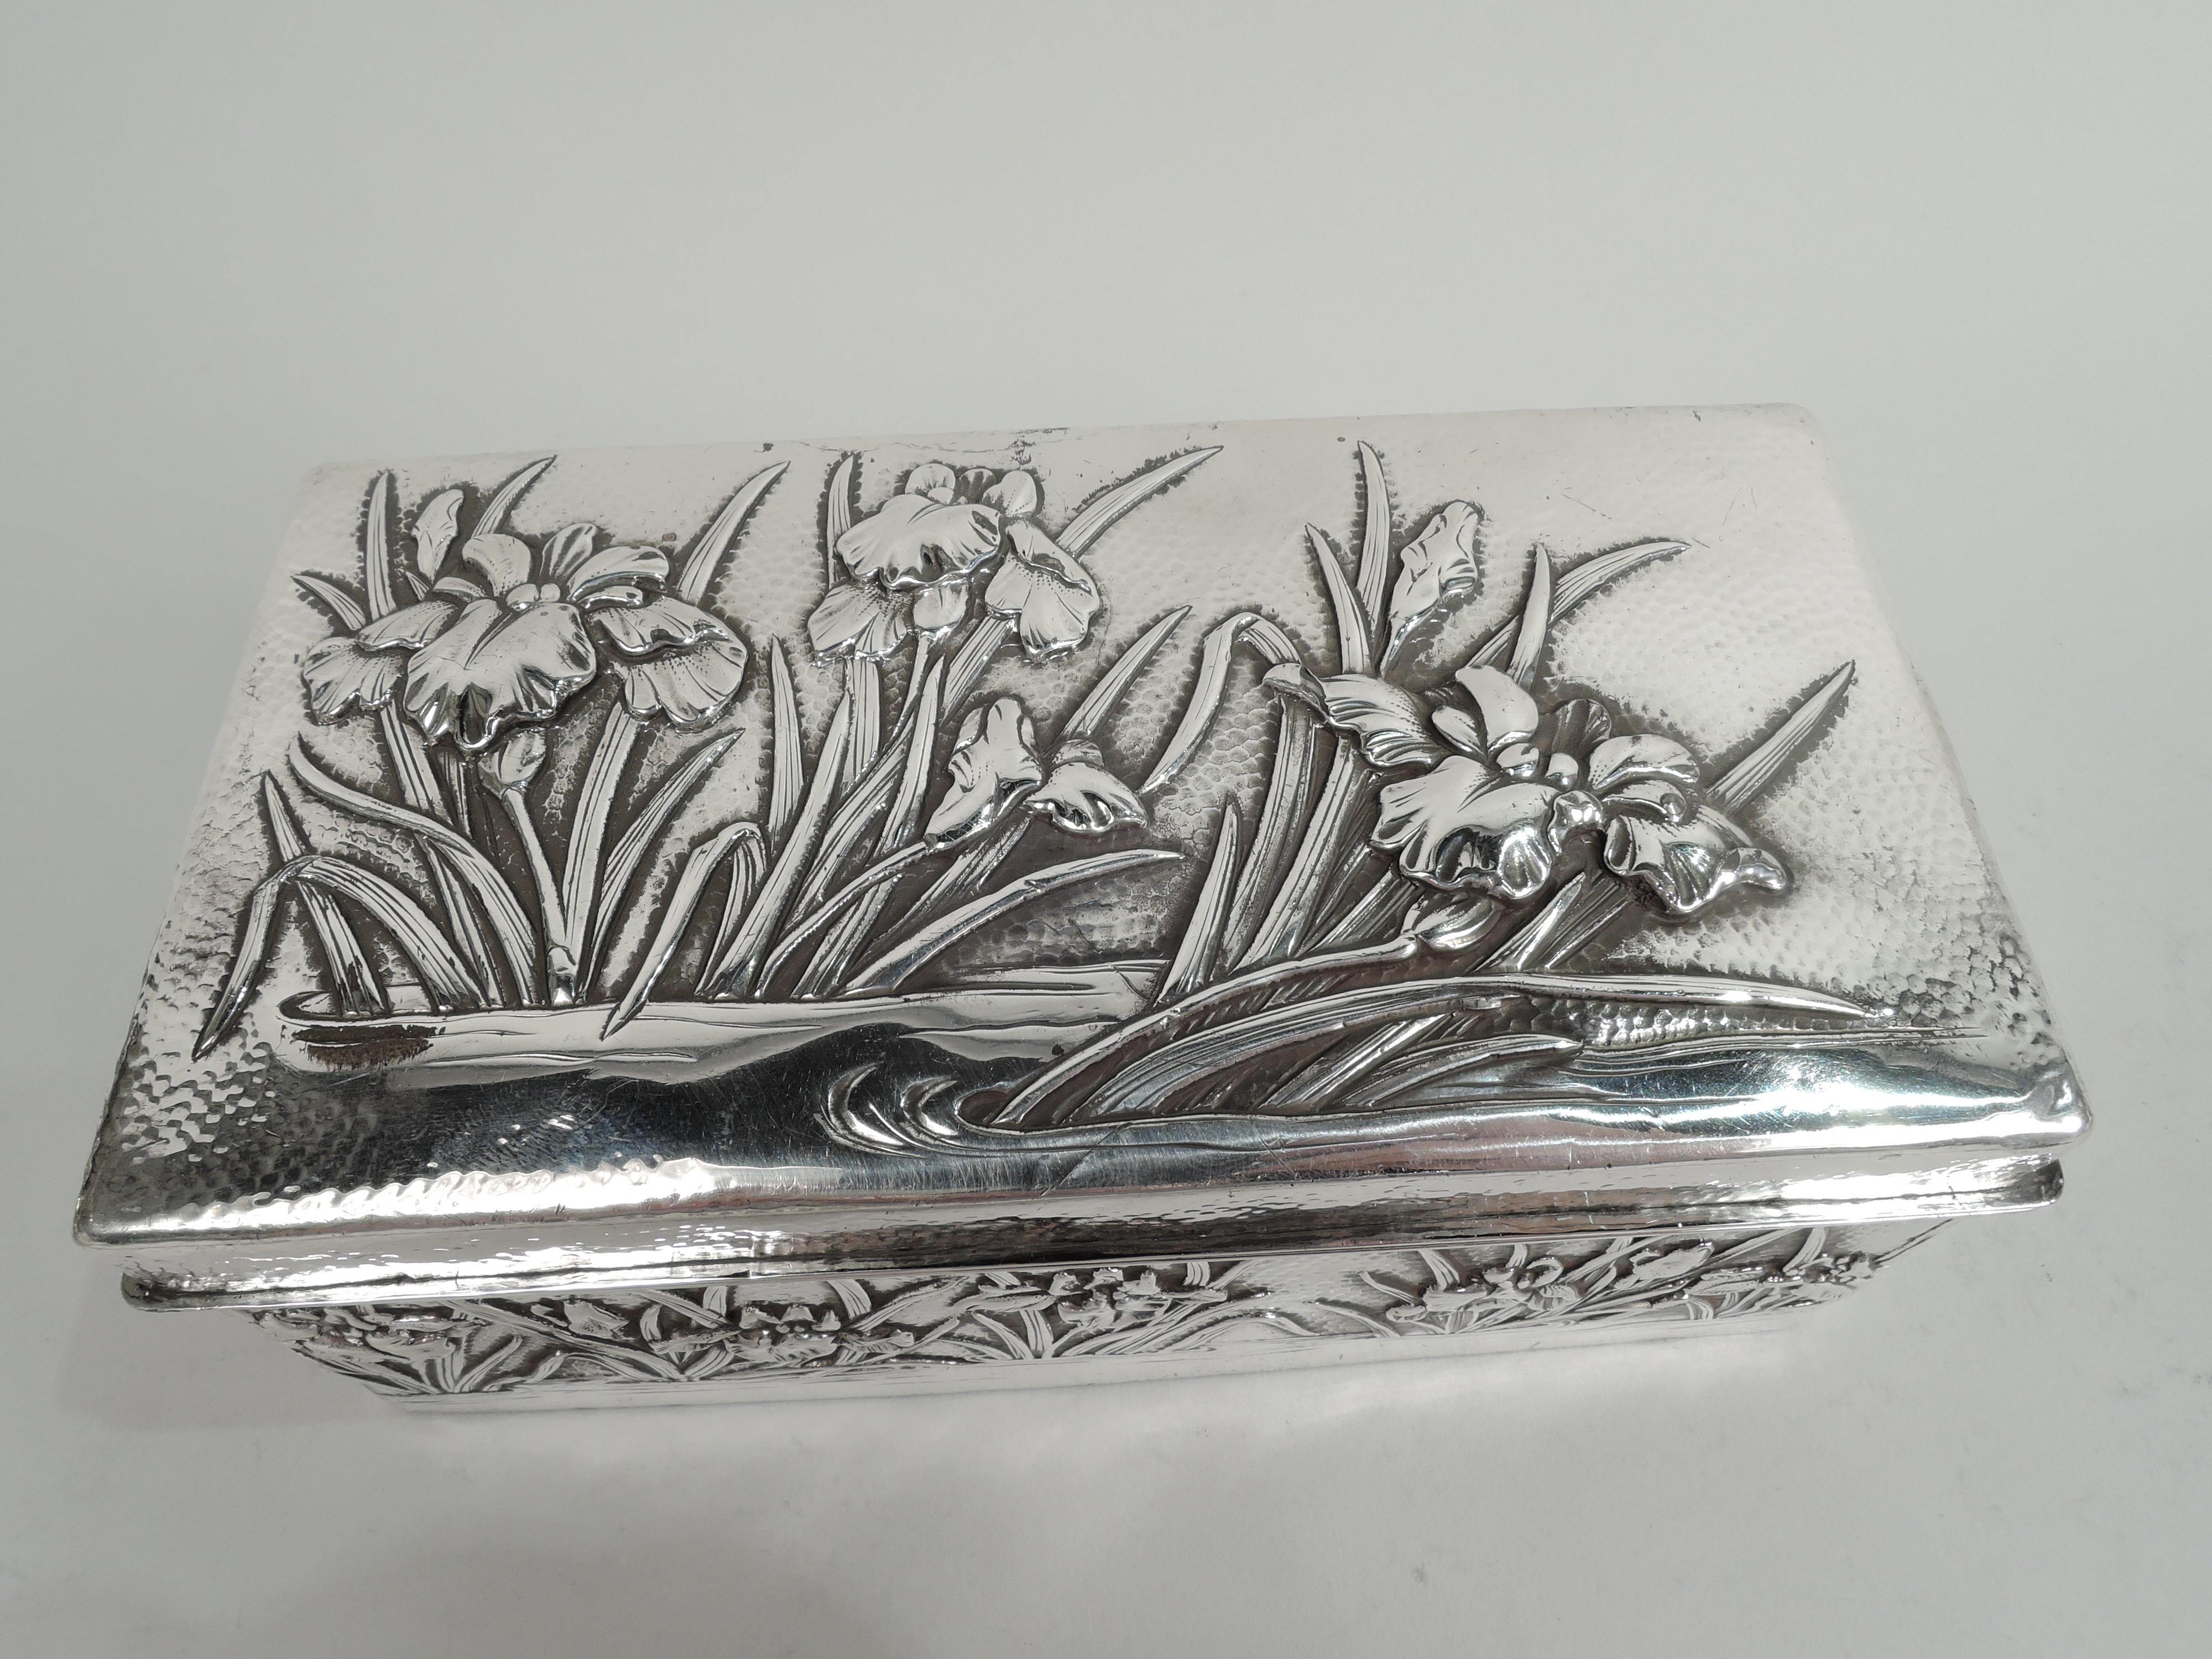 Japanese silver box, ca 1890. Rectangular with straight sides and hinged cover. On cover top and box sides are chased and engraved iris flowers and tendrils in eddying water. Stippled ground. Box and cover interior lined with stained wood. Open